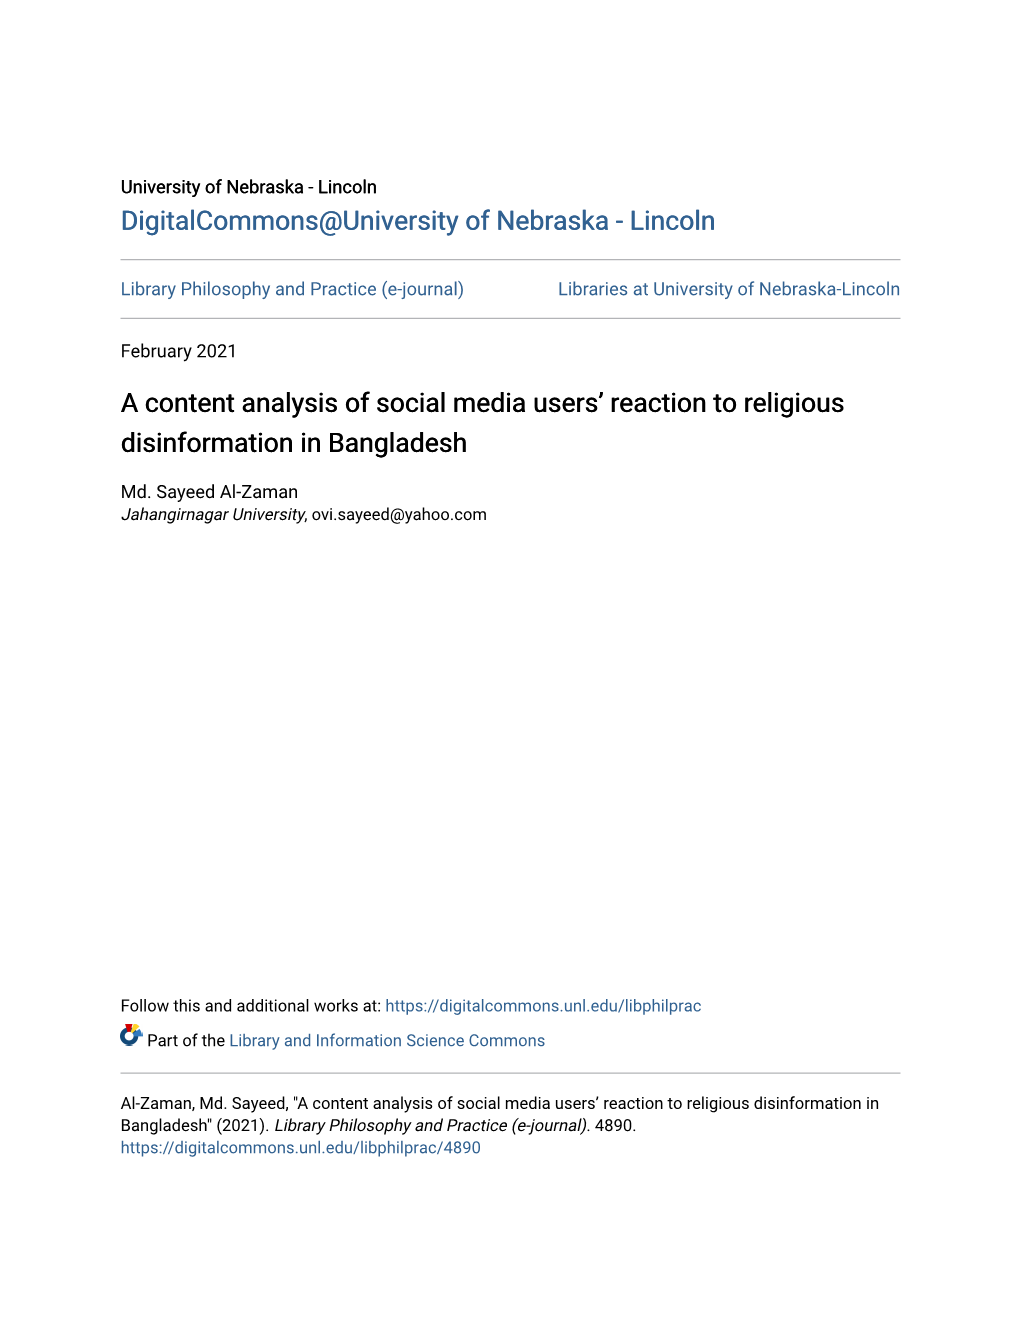 A Content Analysis of Social Media Users' Reaction to Religious Disinformation in Bangladesh